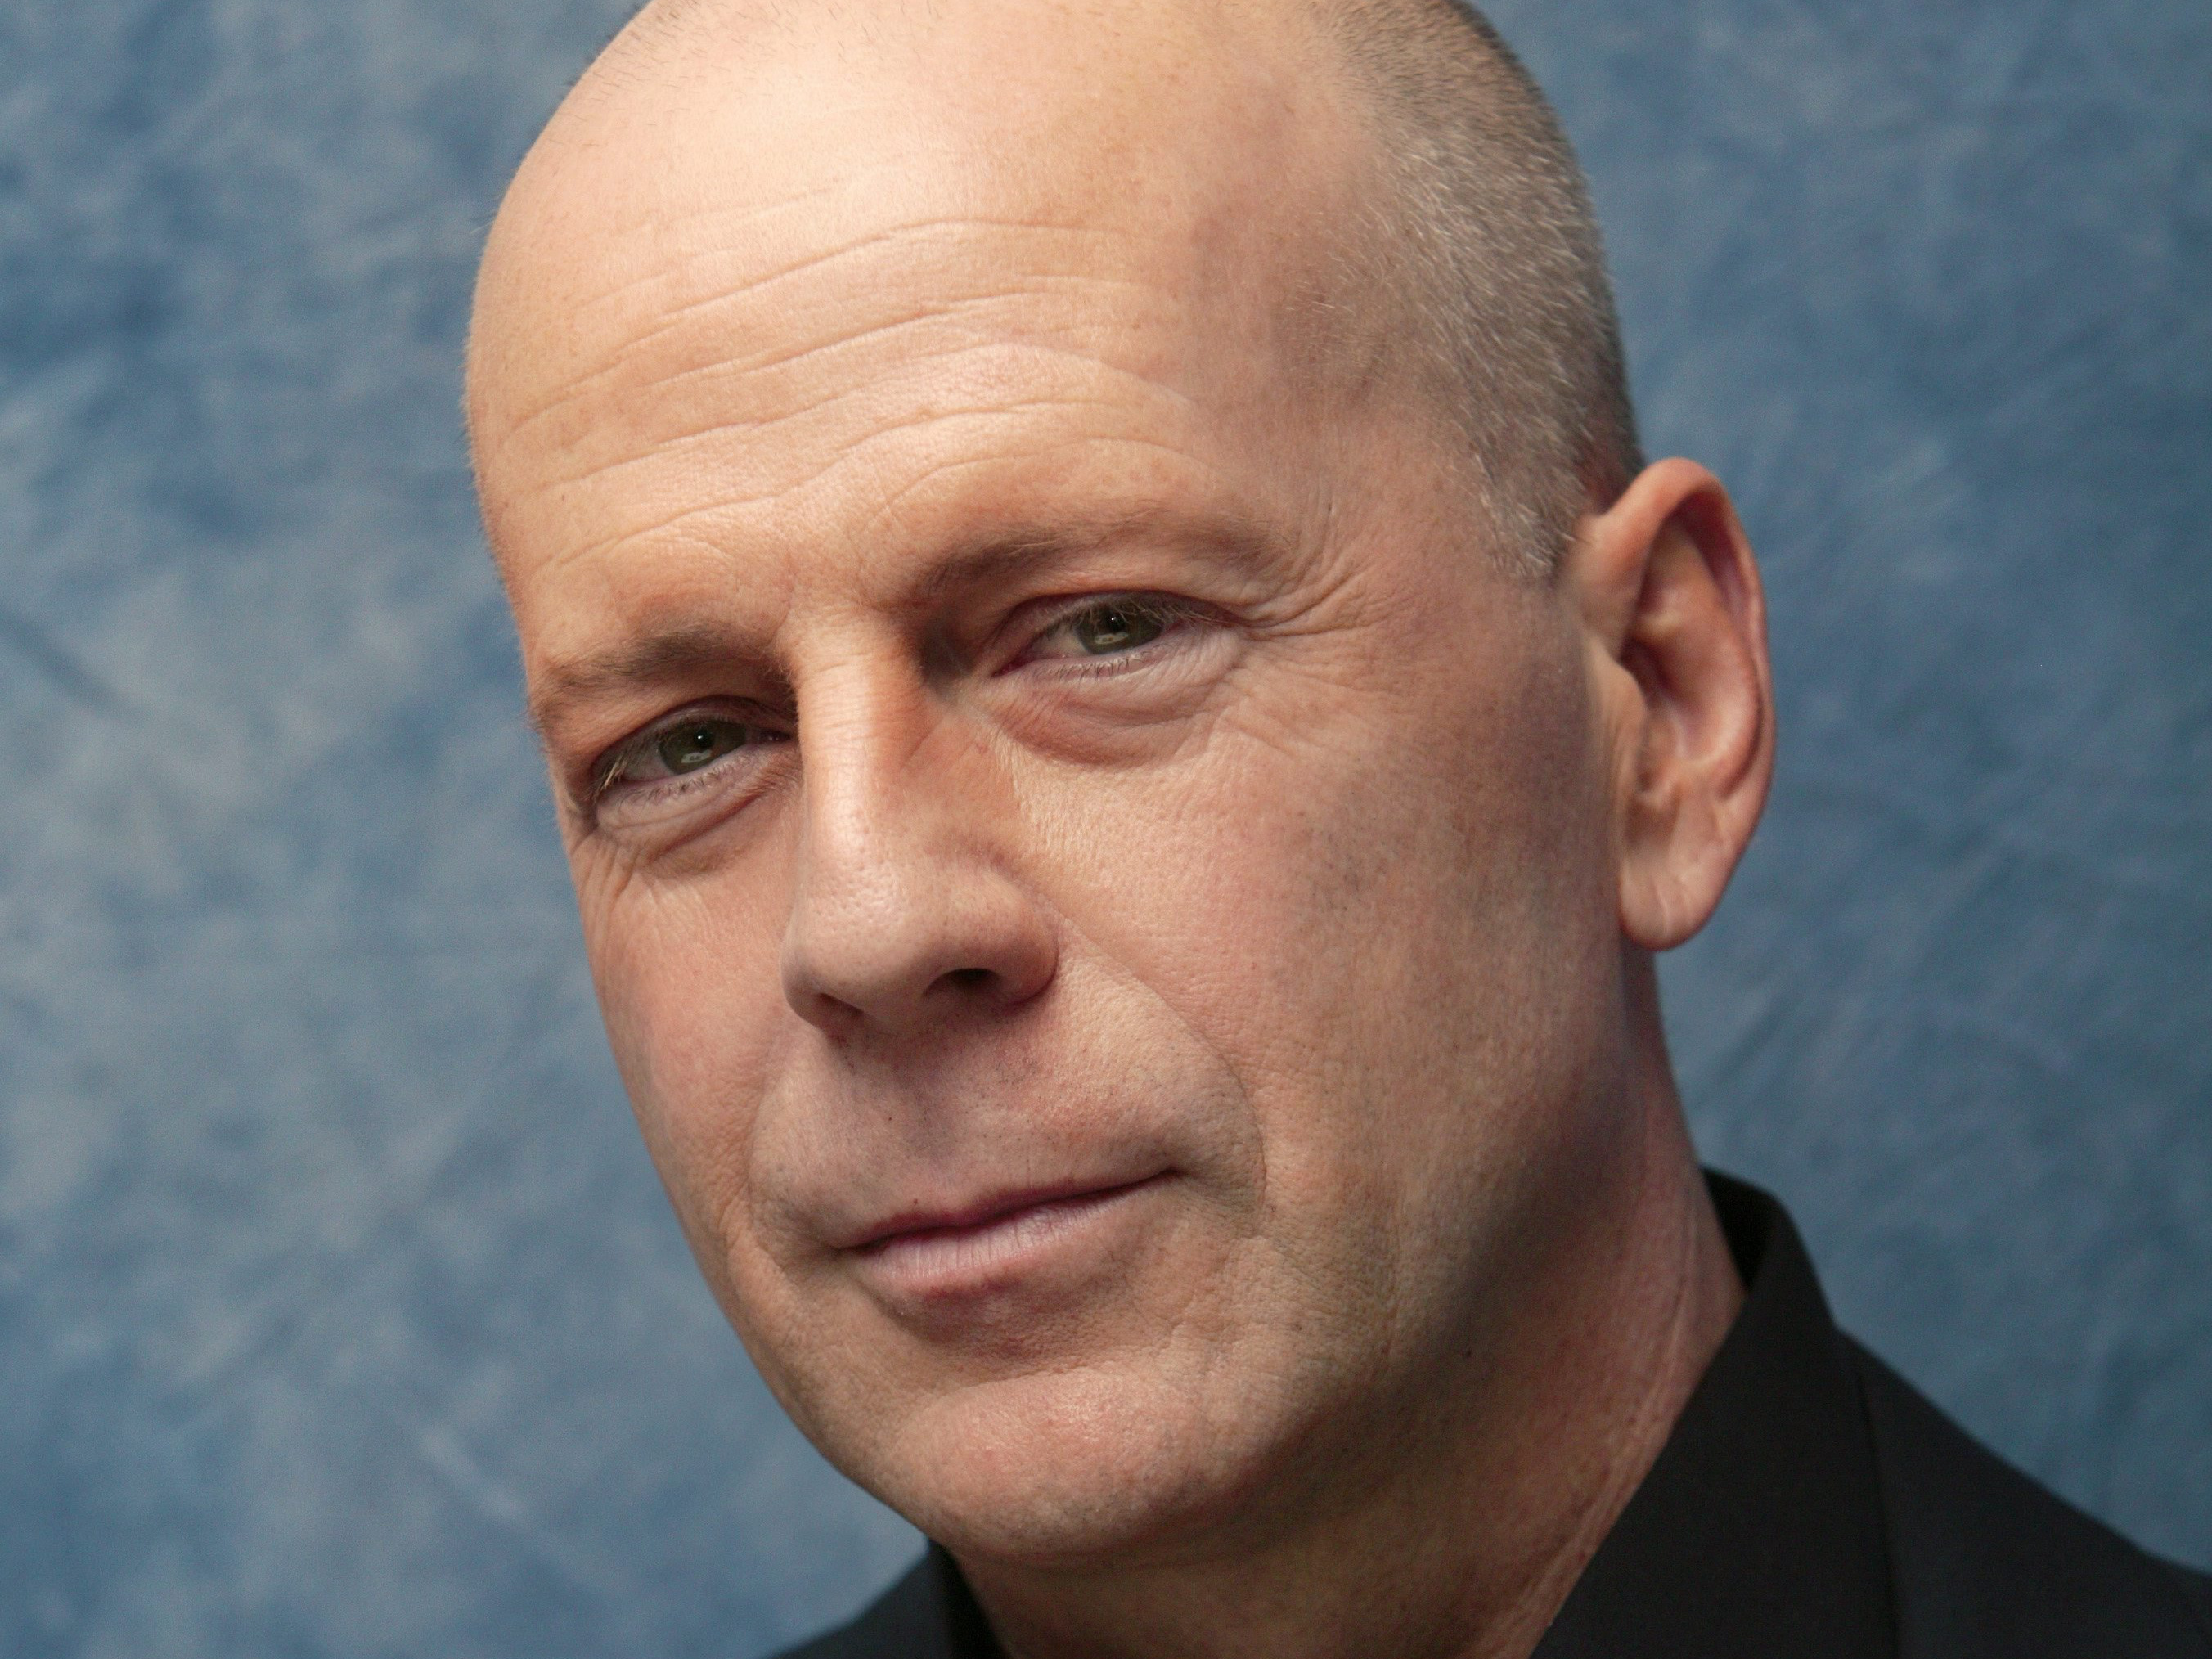 Bruce Willis, Action films, Thrilling roles, Iconic actor, 2710x2030 HD Desktop